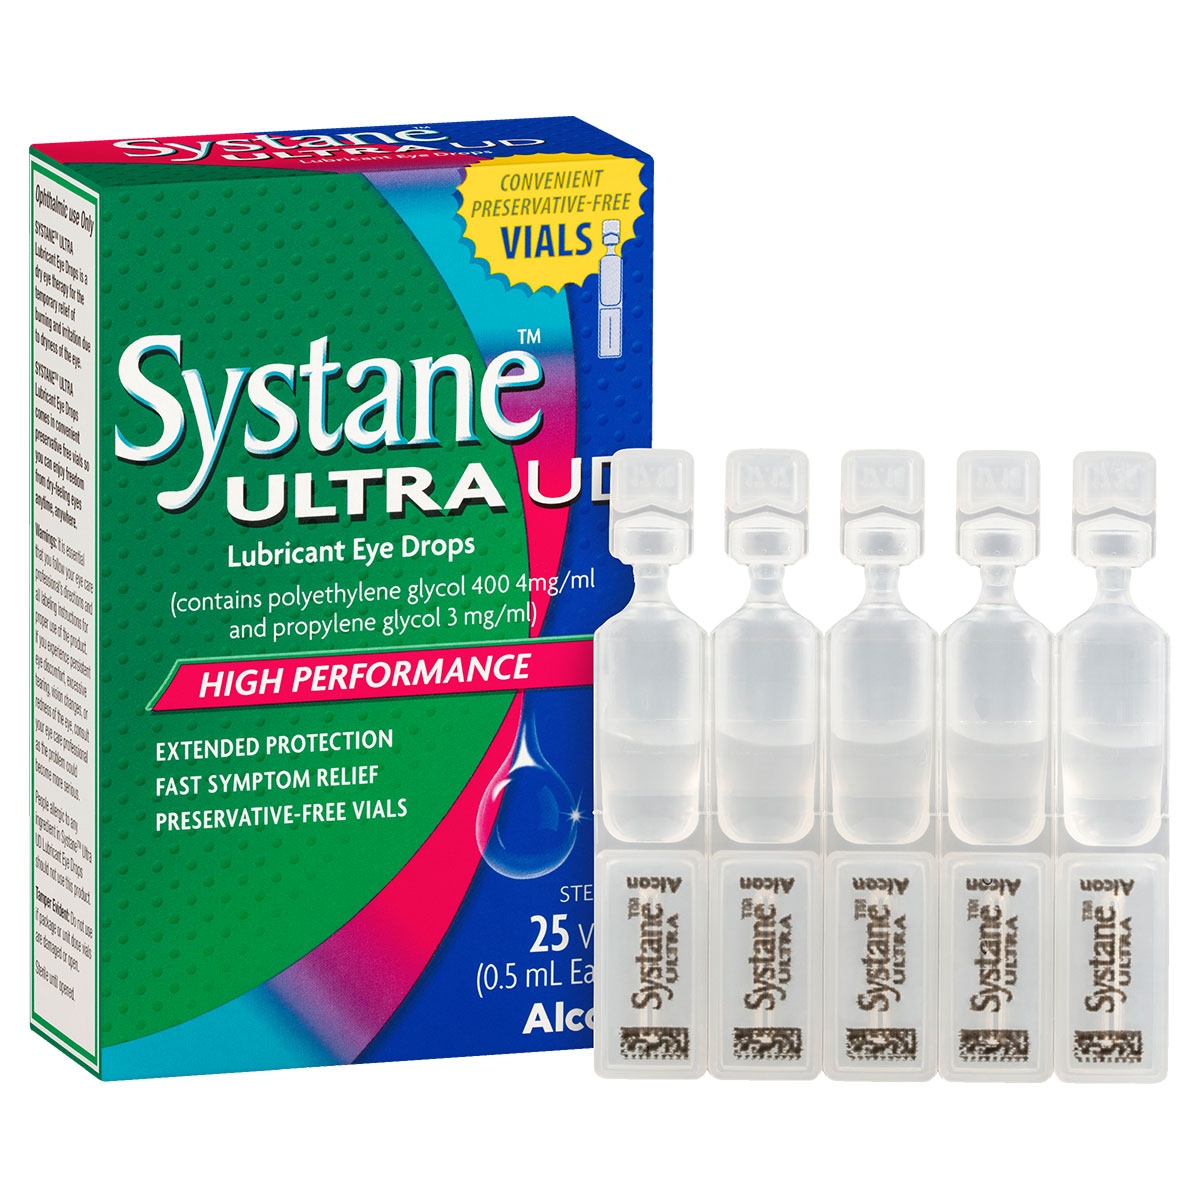 Systane Ultra UD Lubricant Eye Drops Preservative Free 0.5ml x 25 Vials